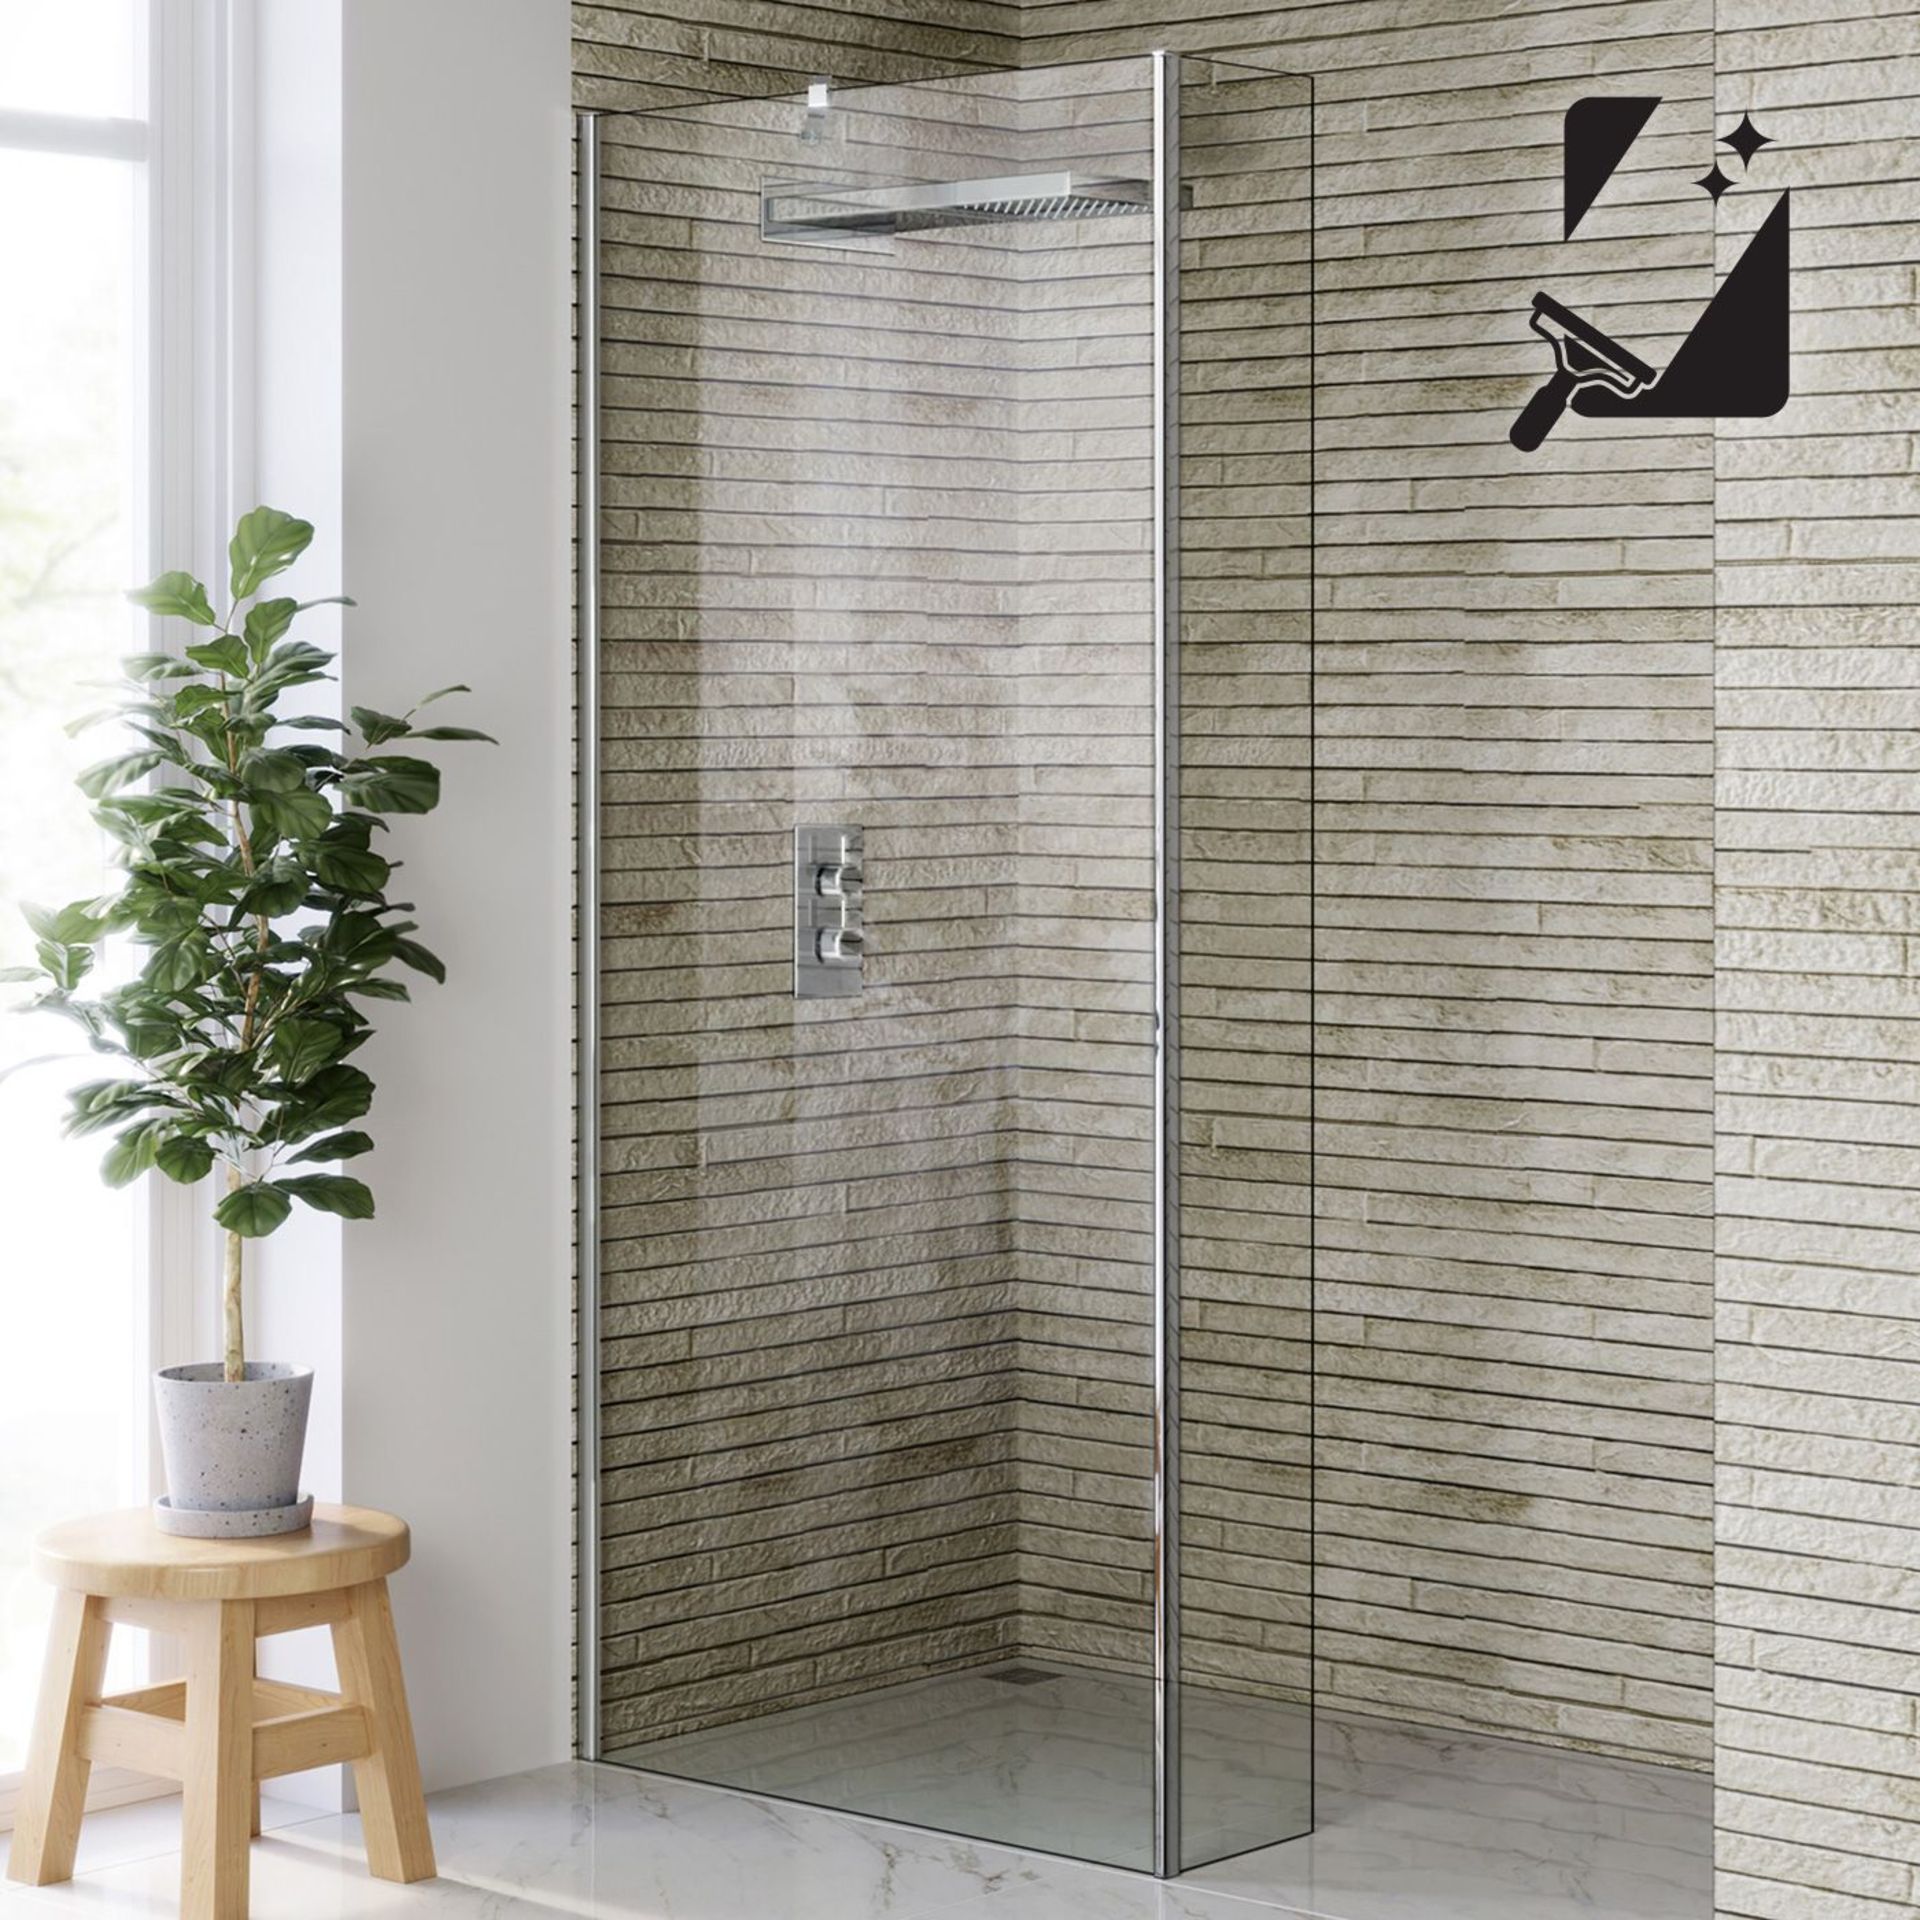 NEW (F168) 800x300mm - 8mm - Premium EasyClean Wetroom and rotatable panel.Rrp £399.99.8mm Eas... - Image 2 of 2